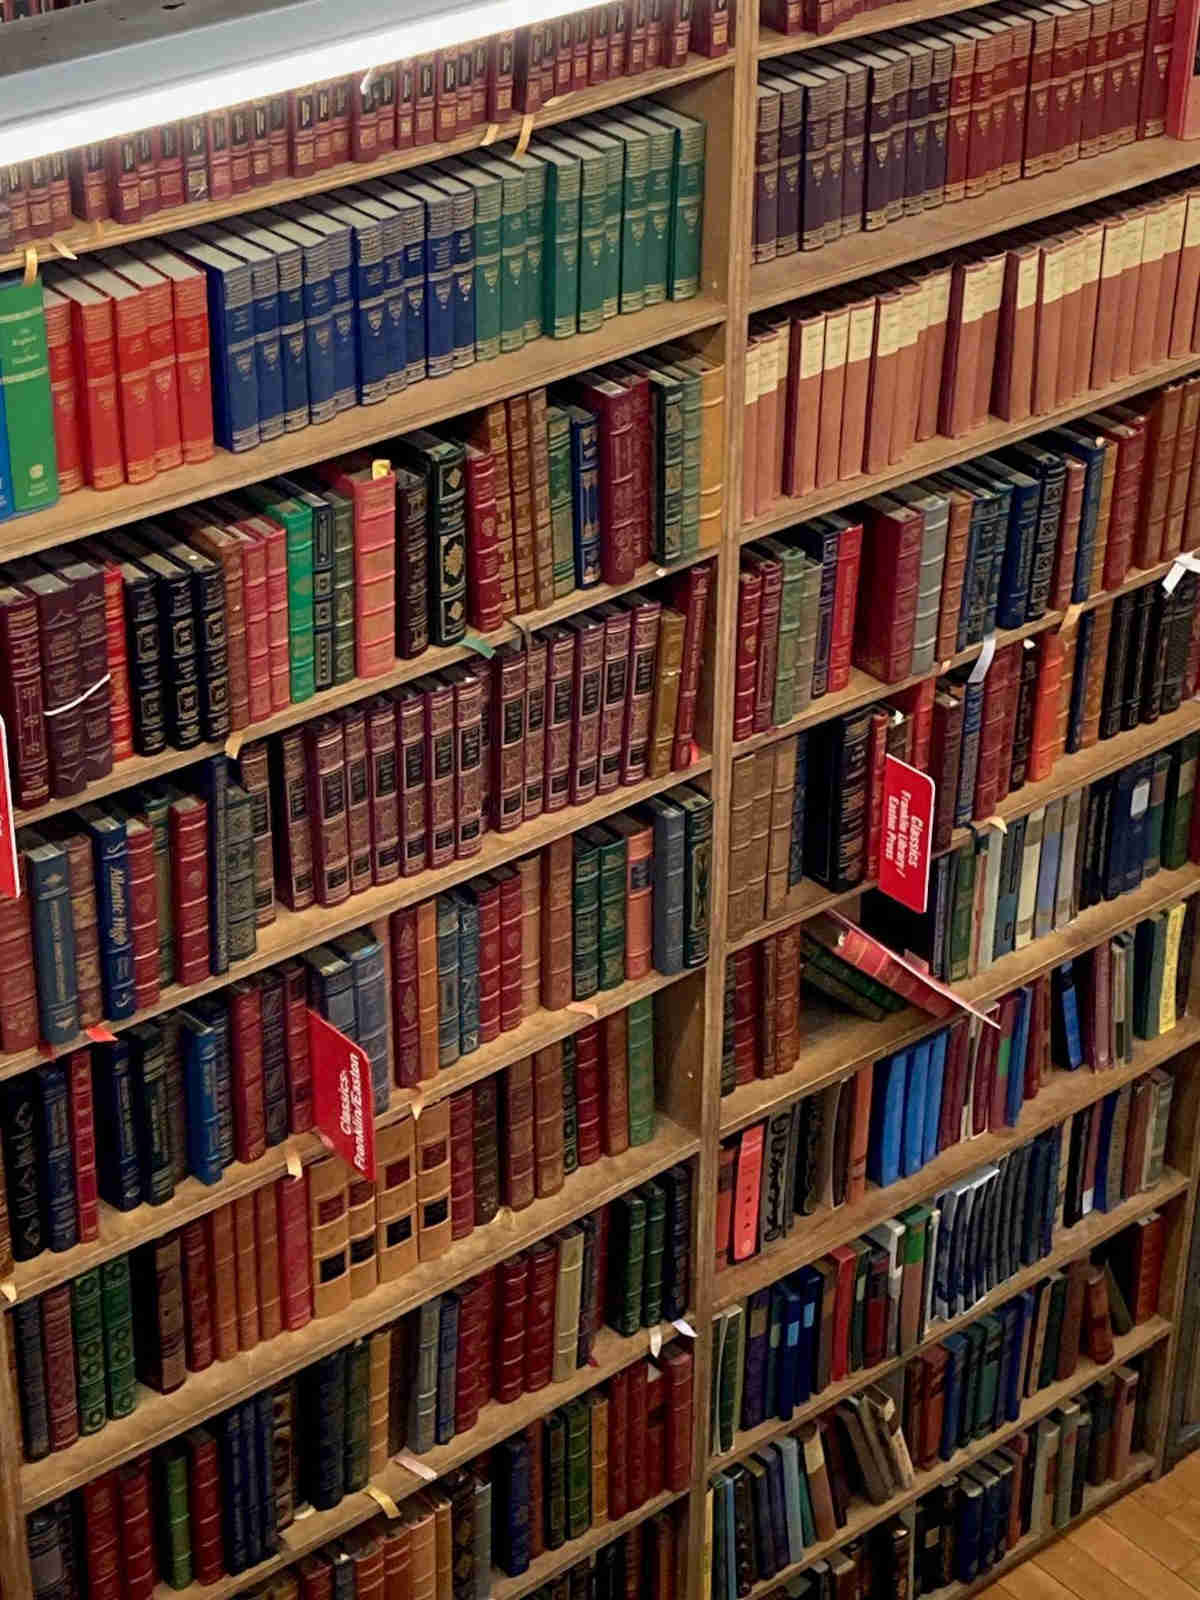 A photograph of a section of a large bookshelf with many brightly colored spines.